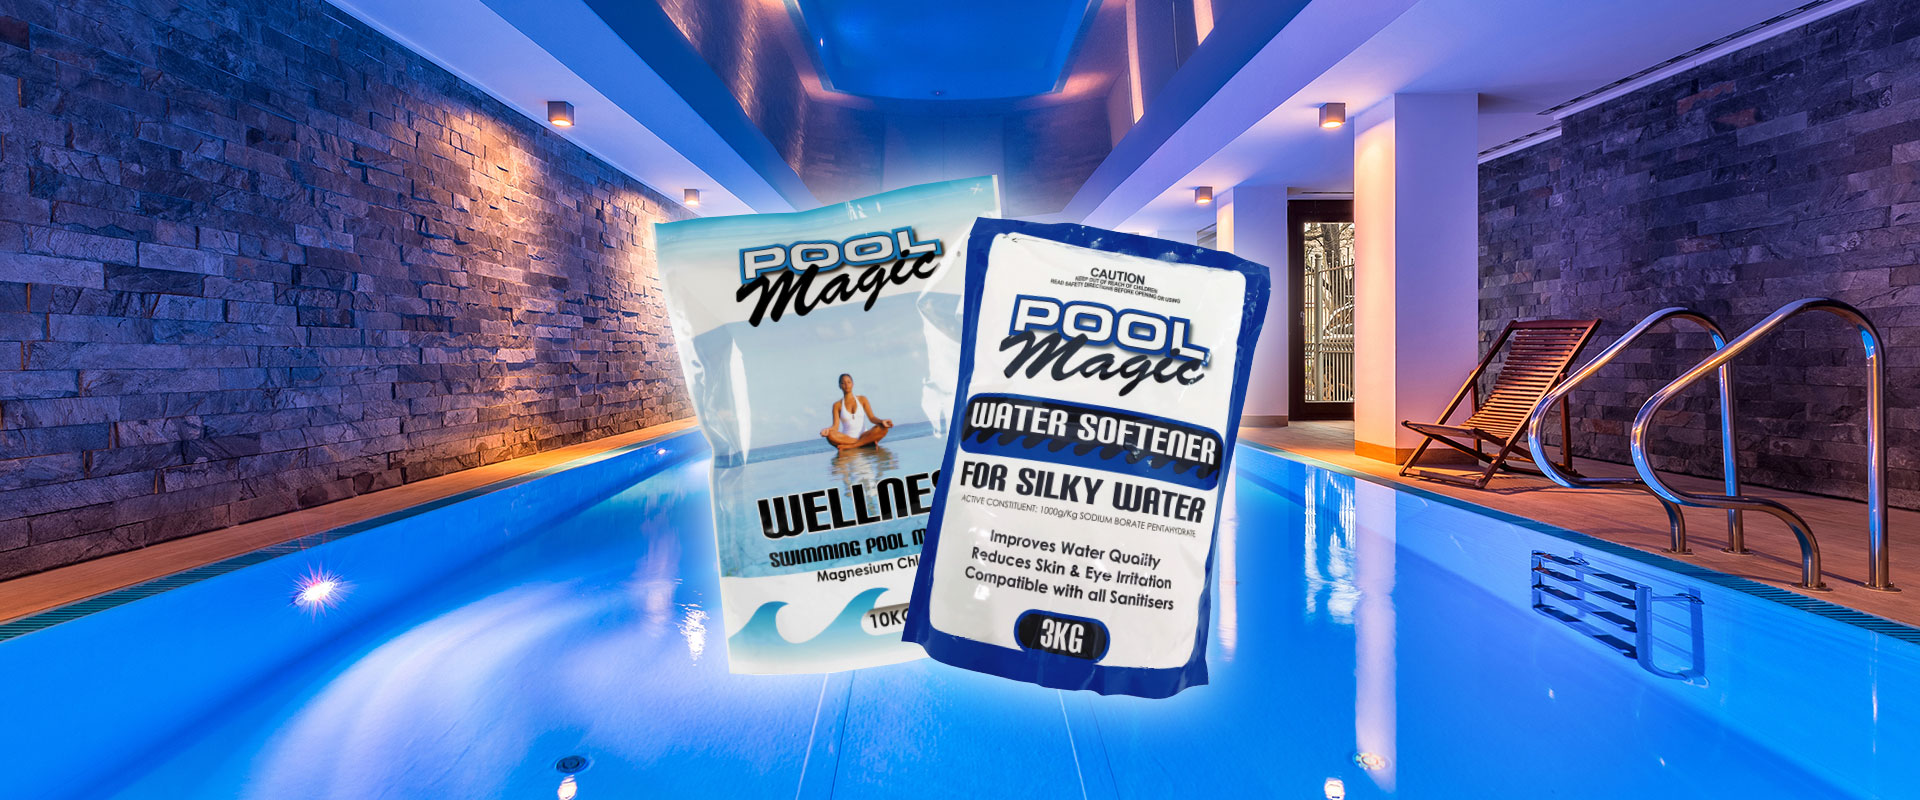 The Ultimate Healthy Pool & Spa Experience